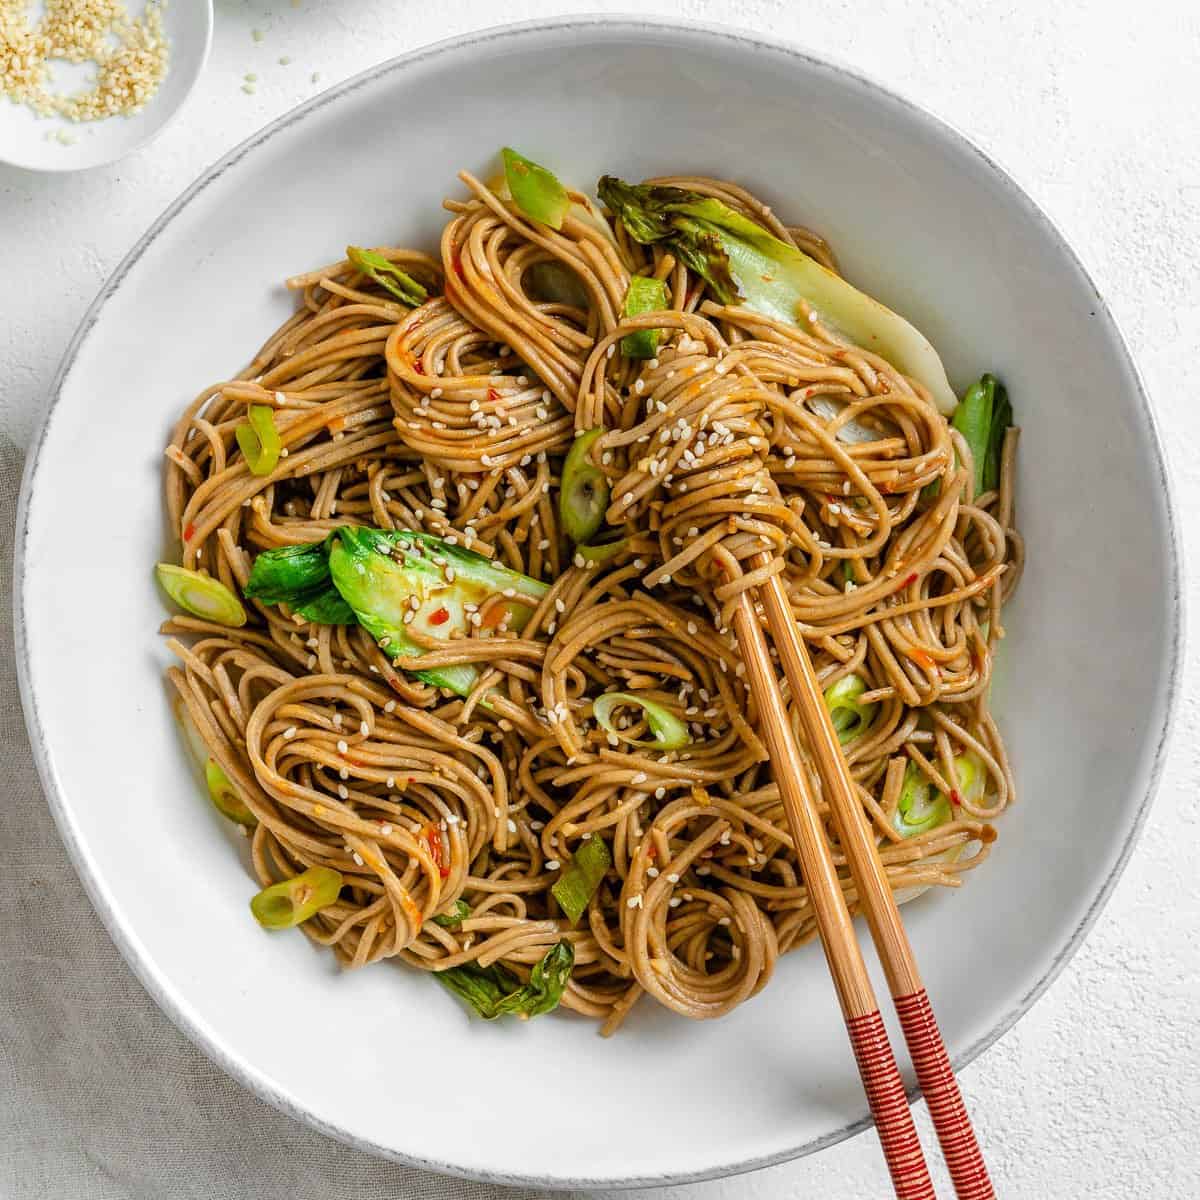 Spicy Garlic Soba Noodles with Bok Choy - This Savory Vegan